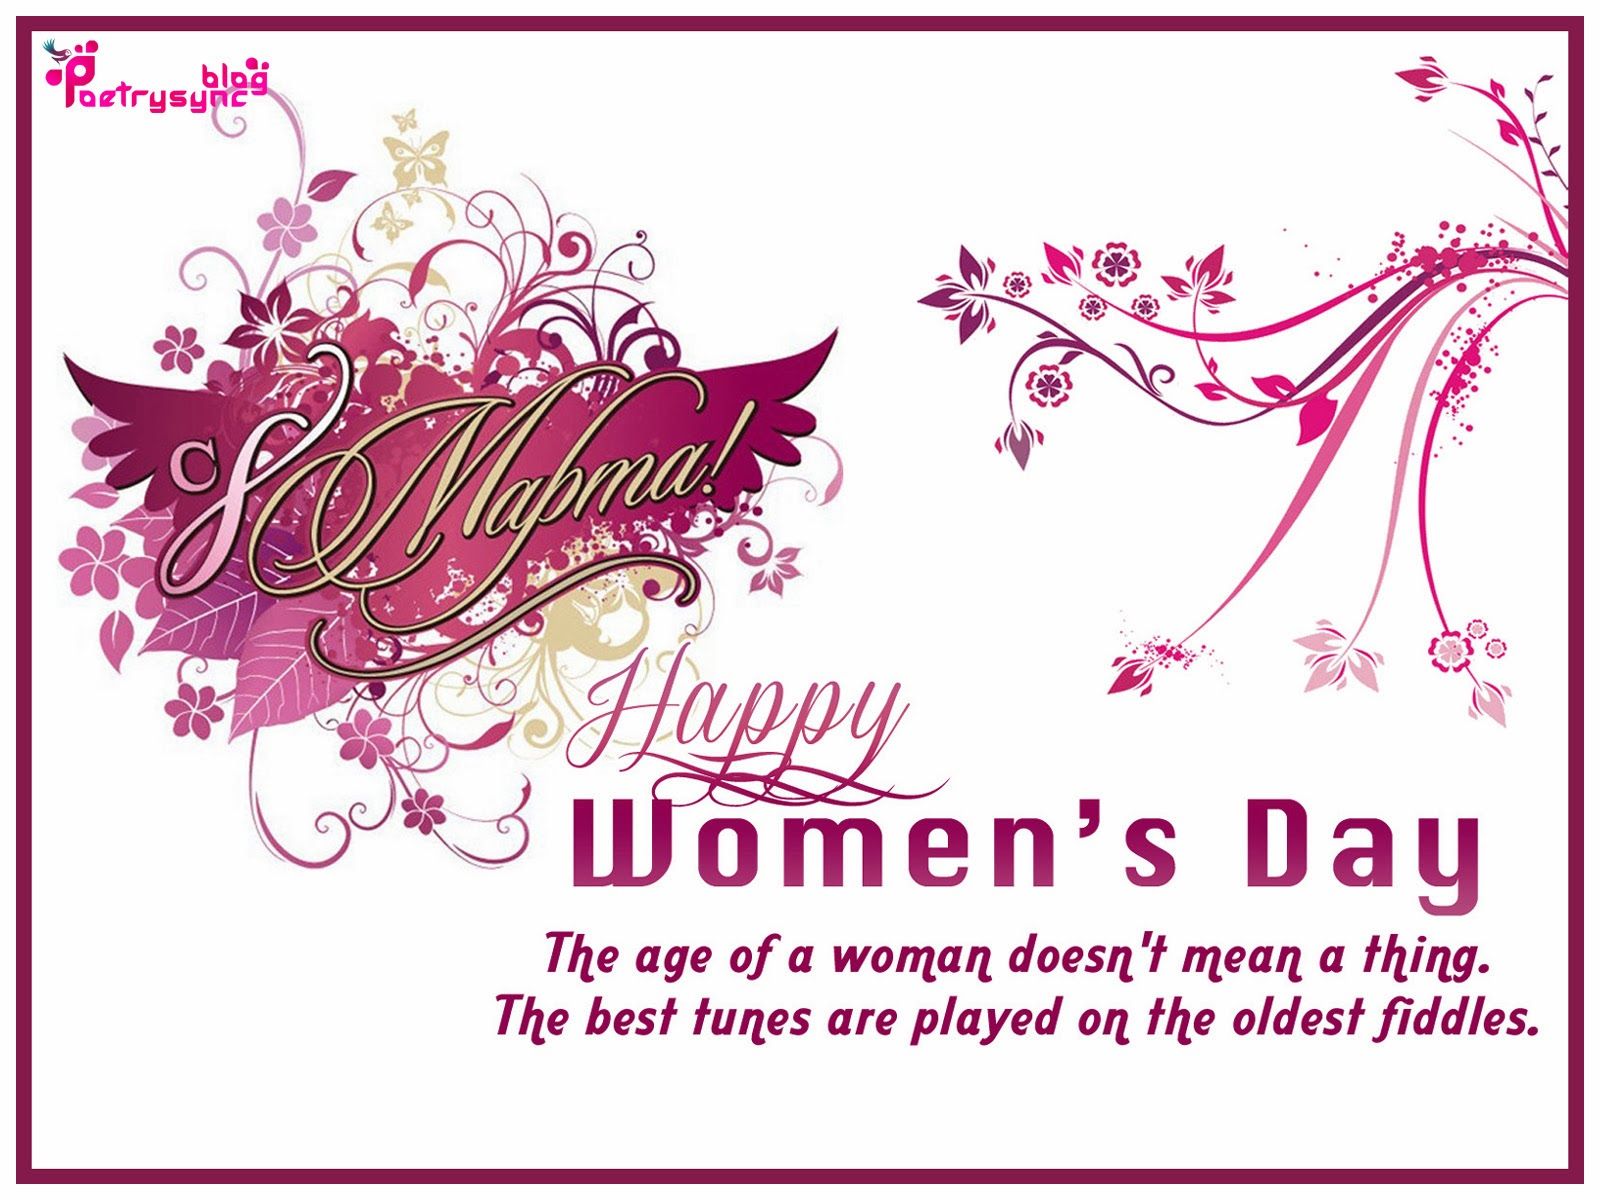 Holidays International Woman S Day Download Wallpaper International Women's Day Greetings